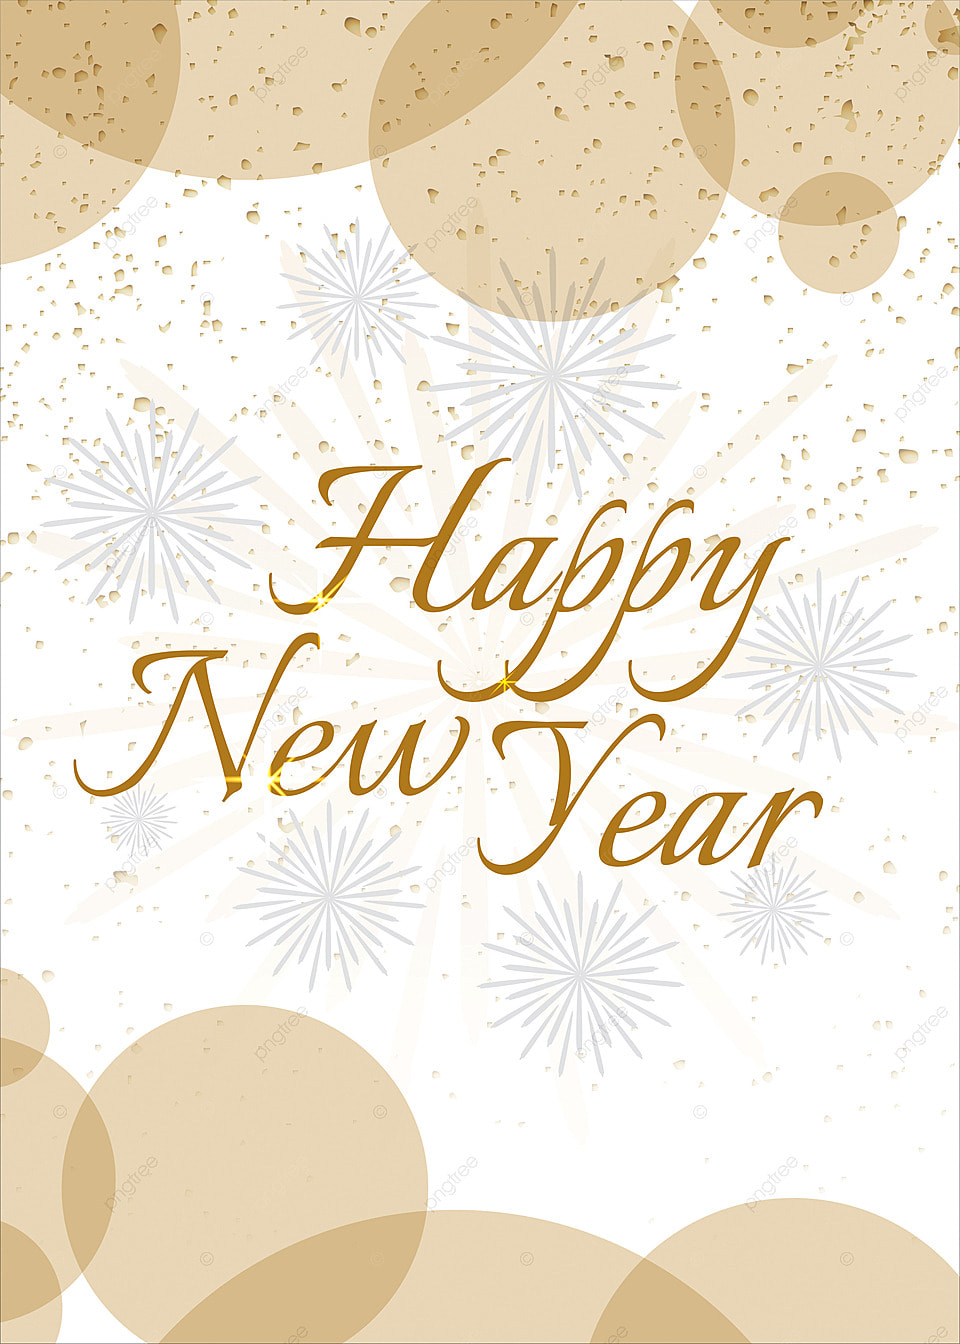 2023 Gold Happy New Year Mobile Wallpaper Season S Greetings Text On Black Background, 2023 Gold Background, 2023 Gold Happy New Year, Crishmast Background Image for Free Download